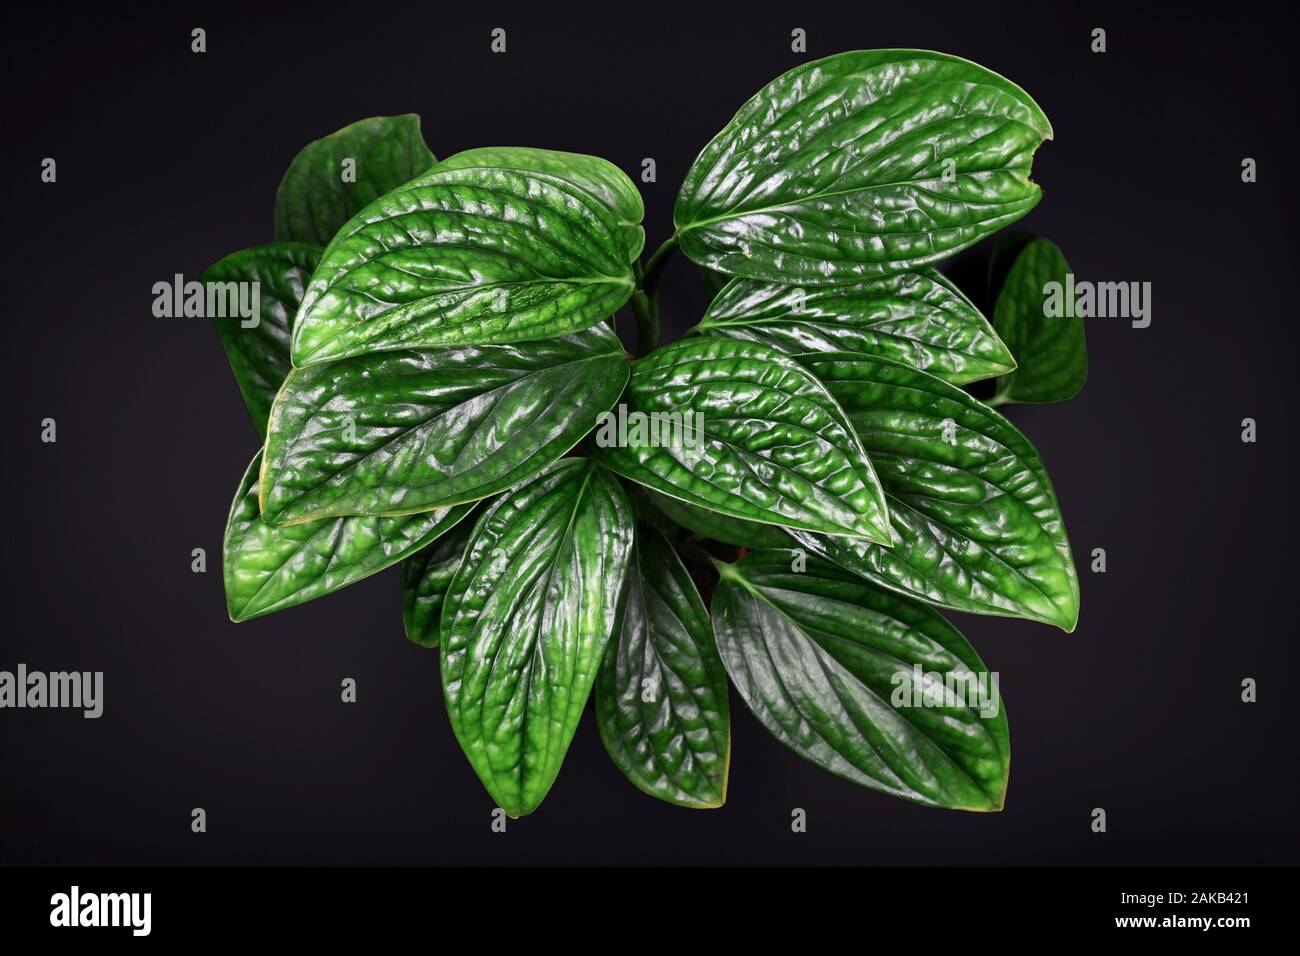 Tropical 'Monstera Karstenianum' house plant, also called 'Monstera sp. Peru' or 'Marble Planet', with puckered, iridescent textured leaves on dark bl Stock Photo